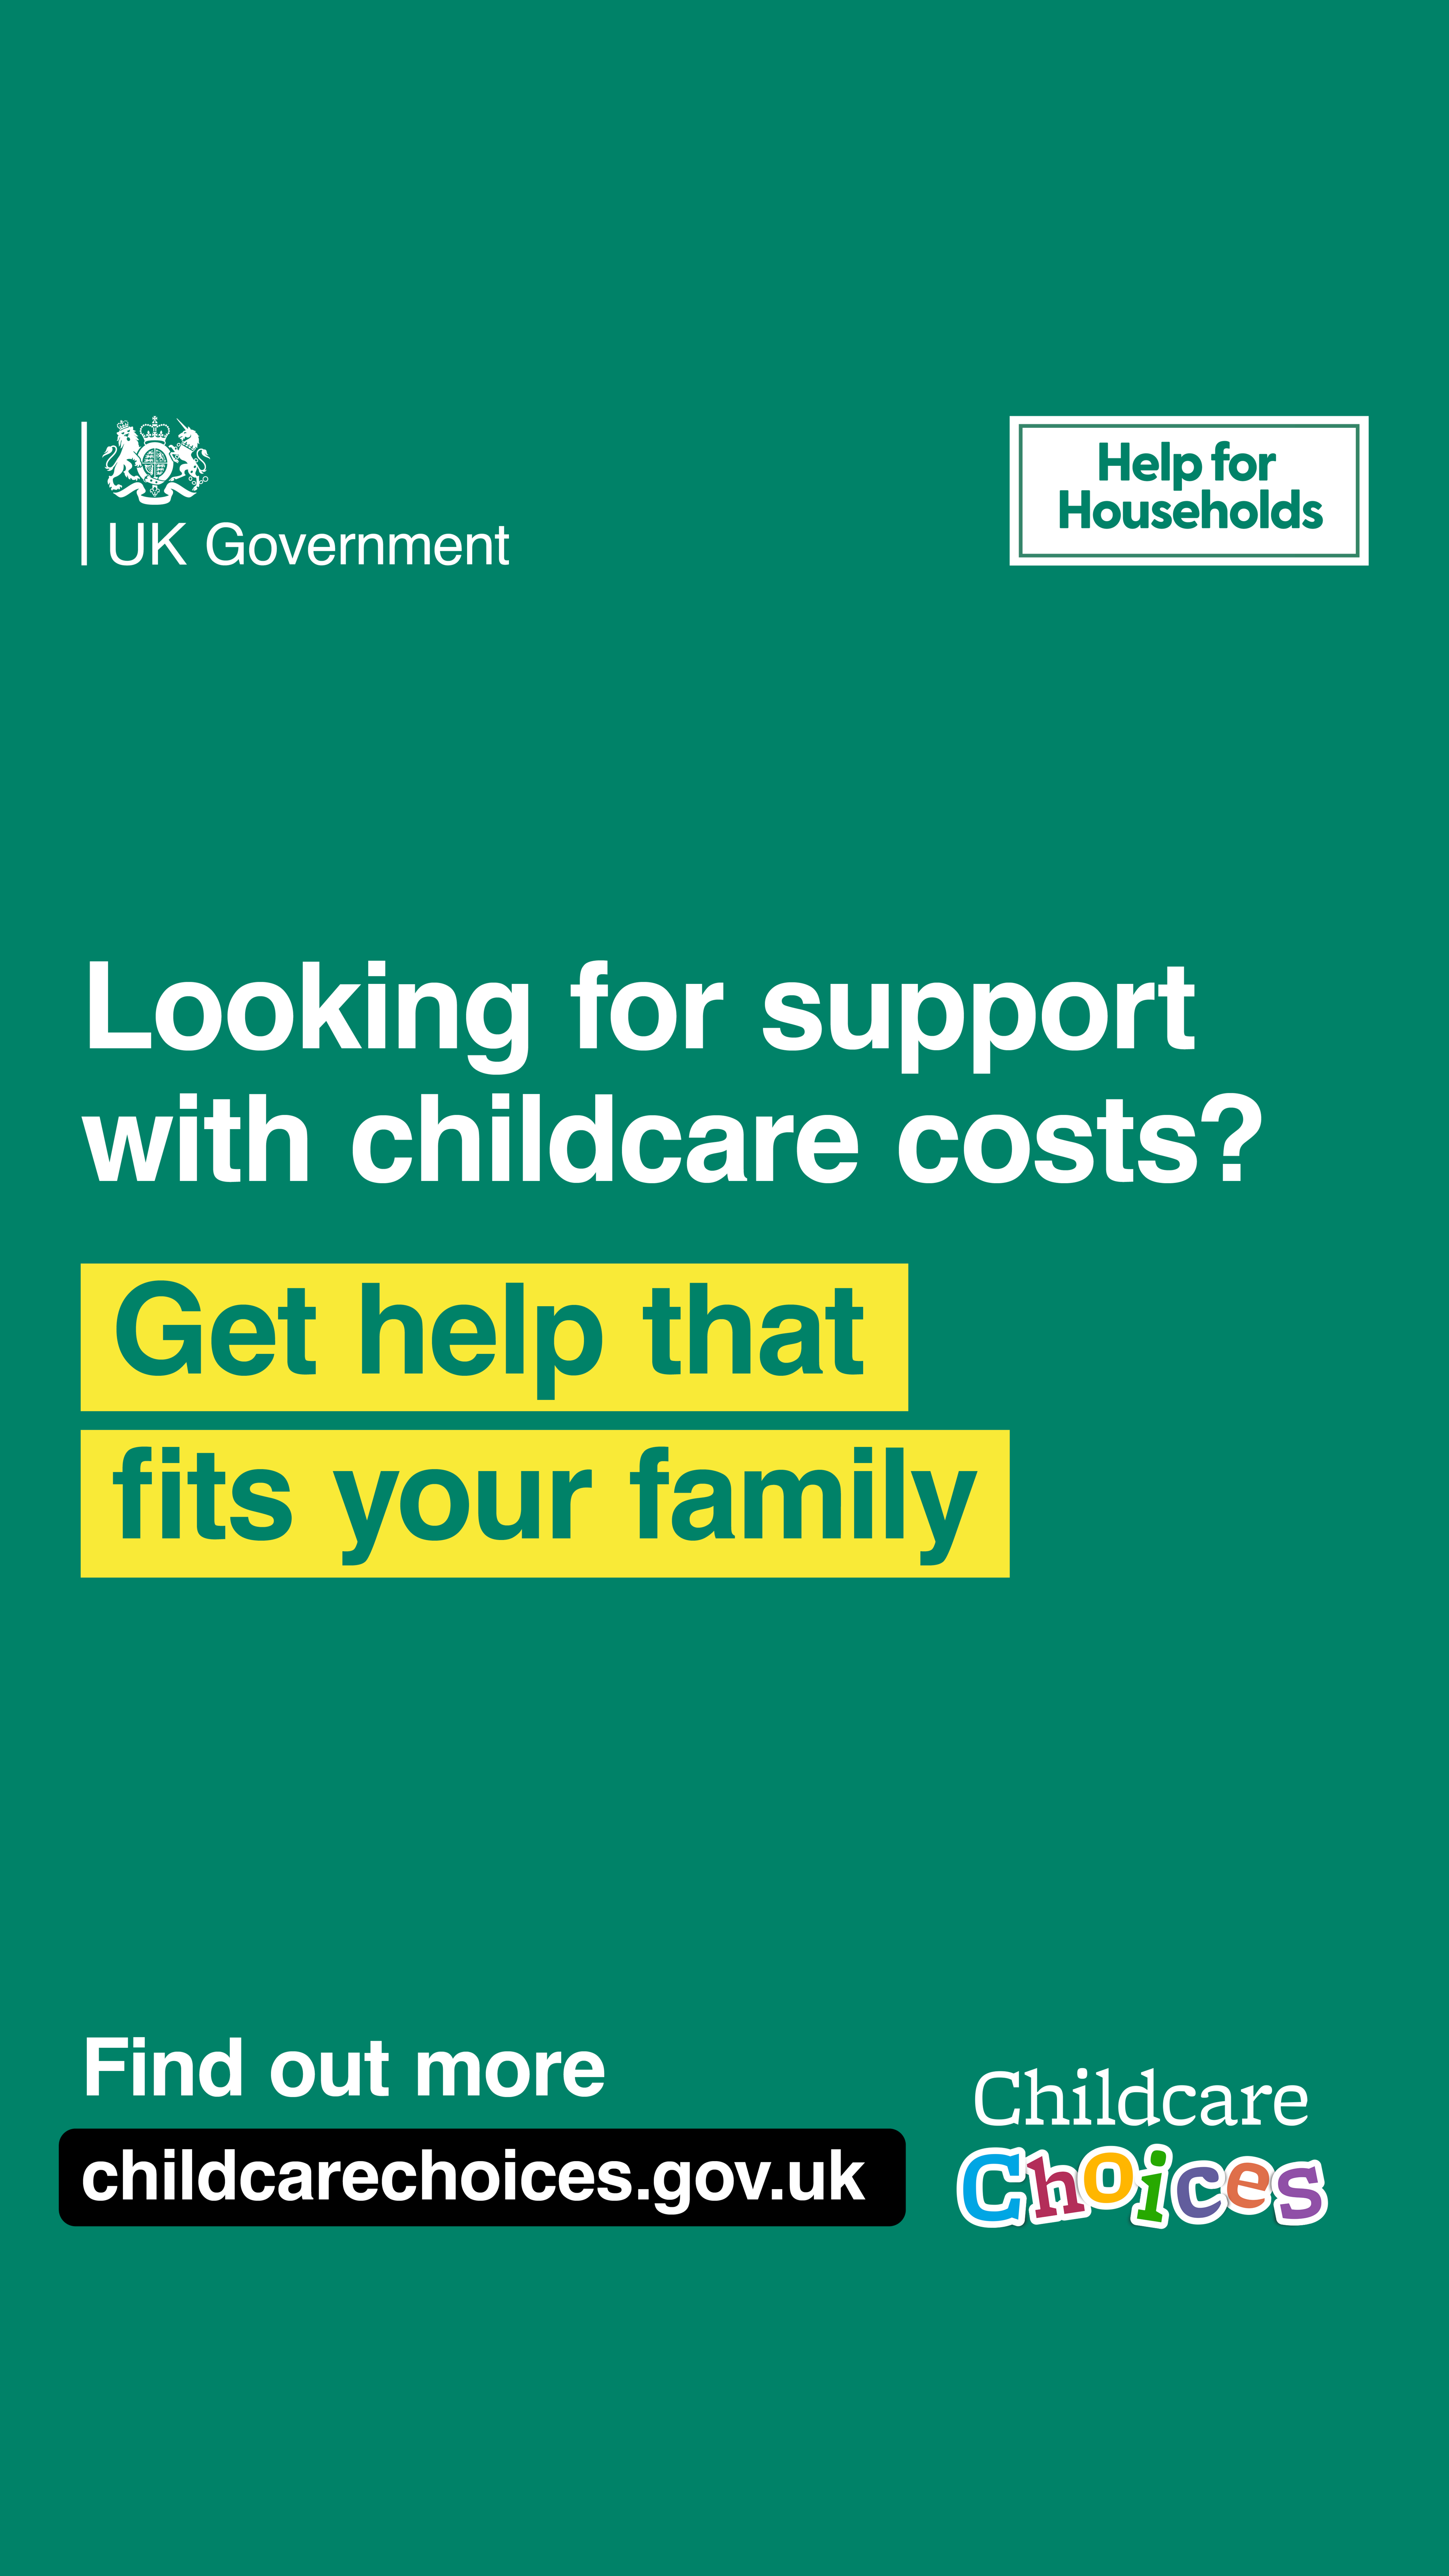 Childcare Choices static 1 (9 x16) display image